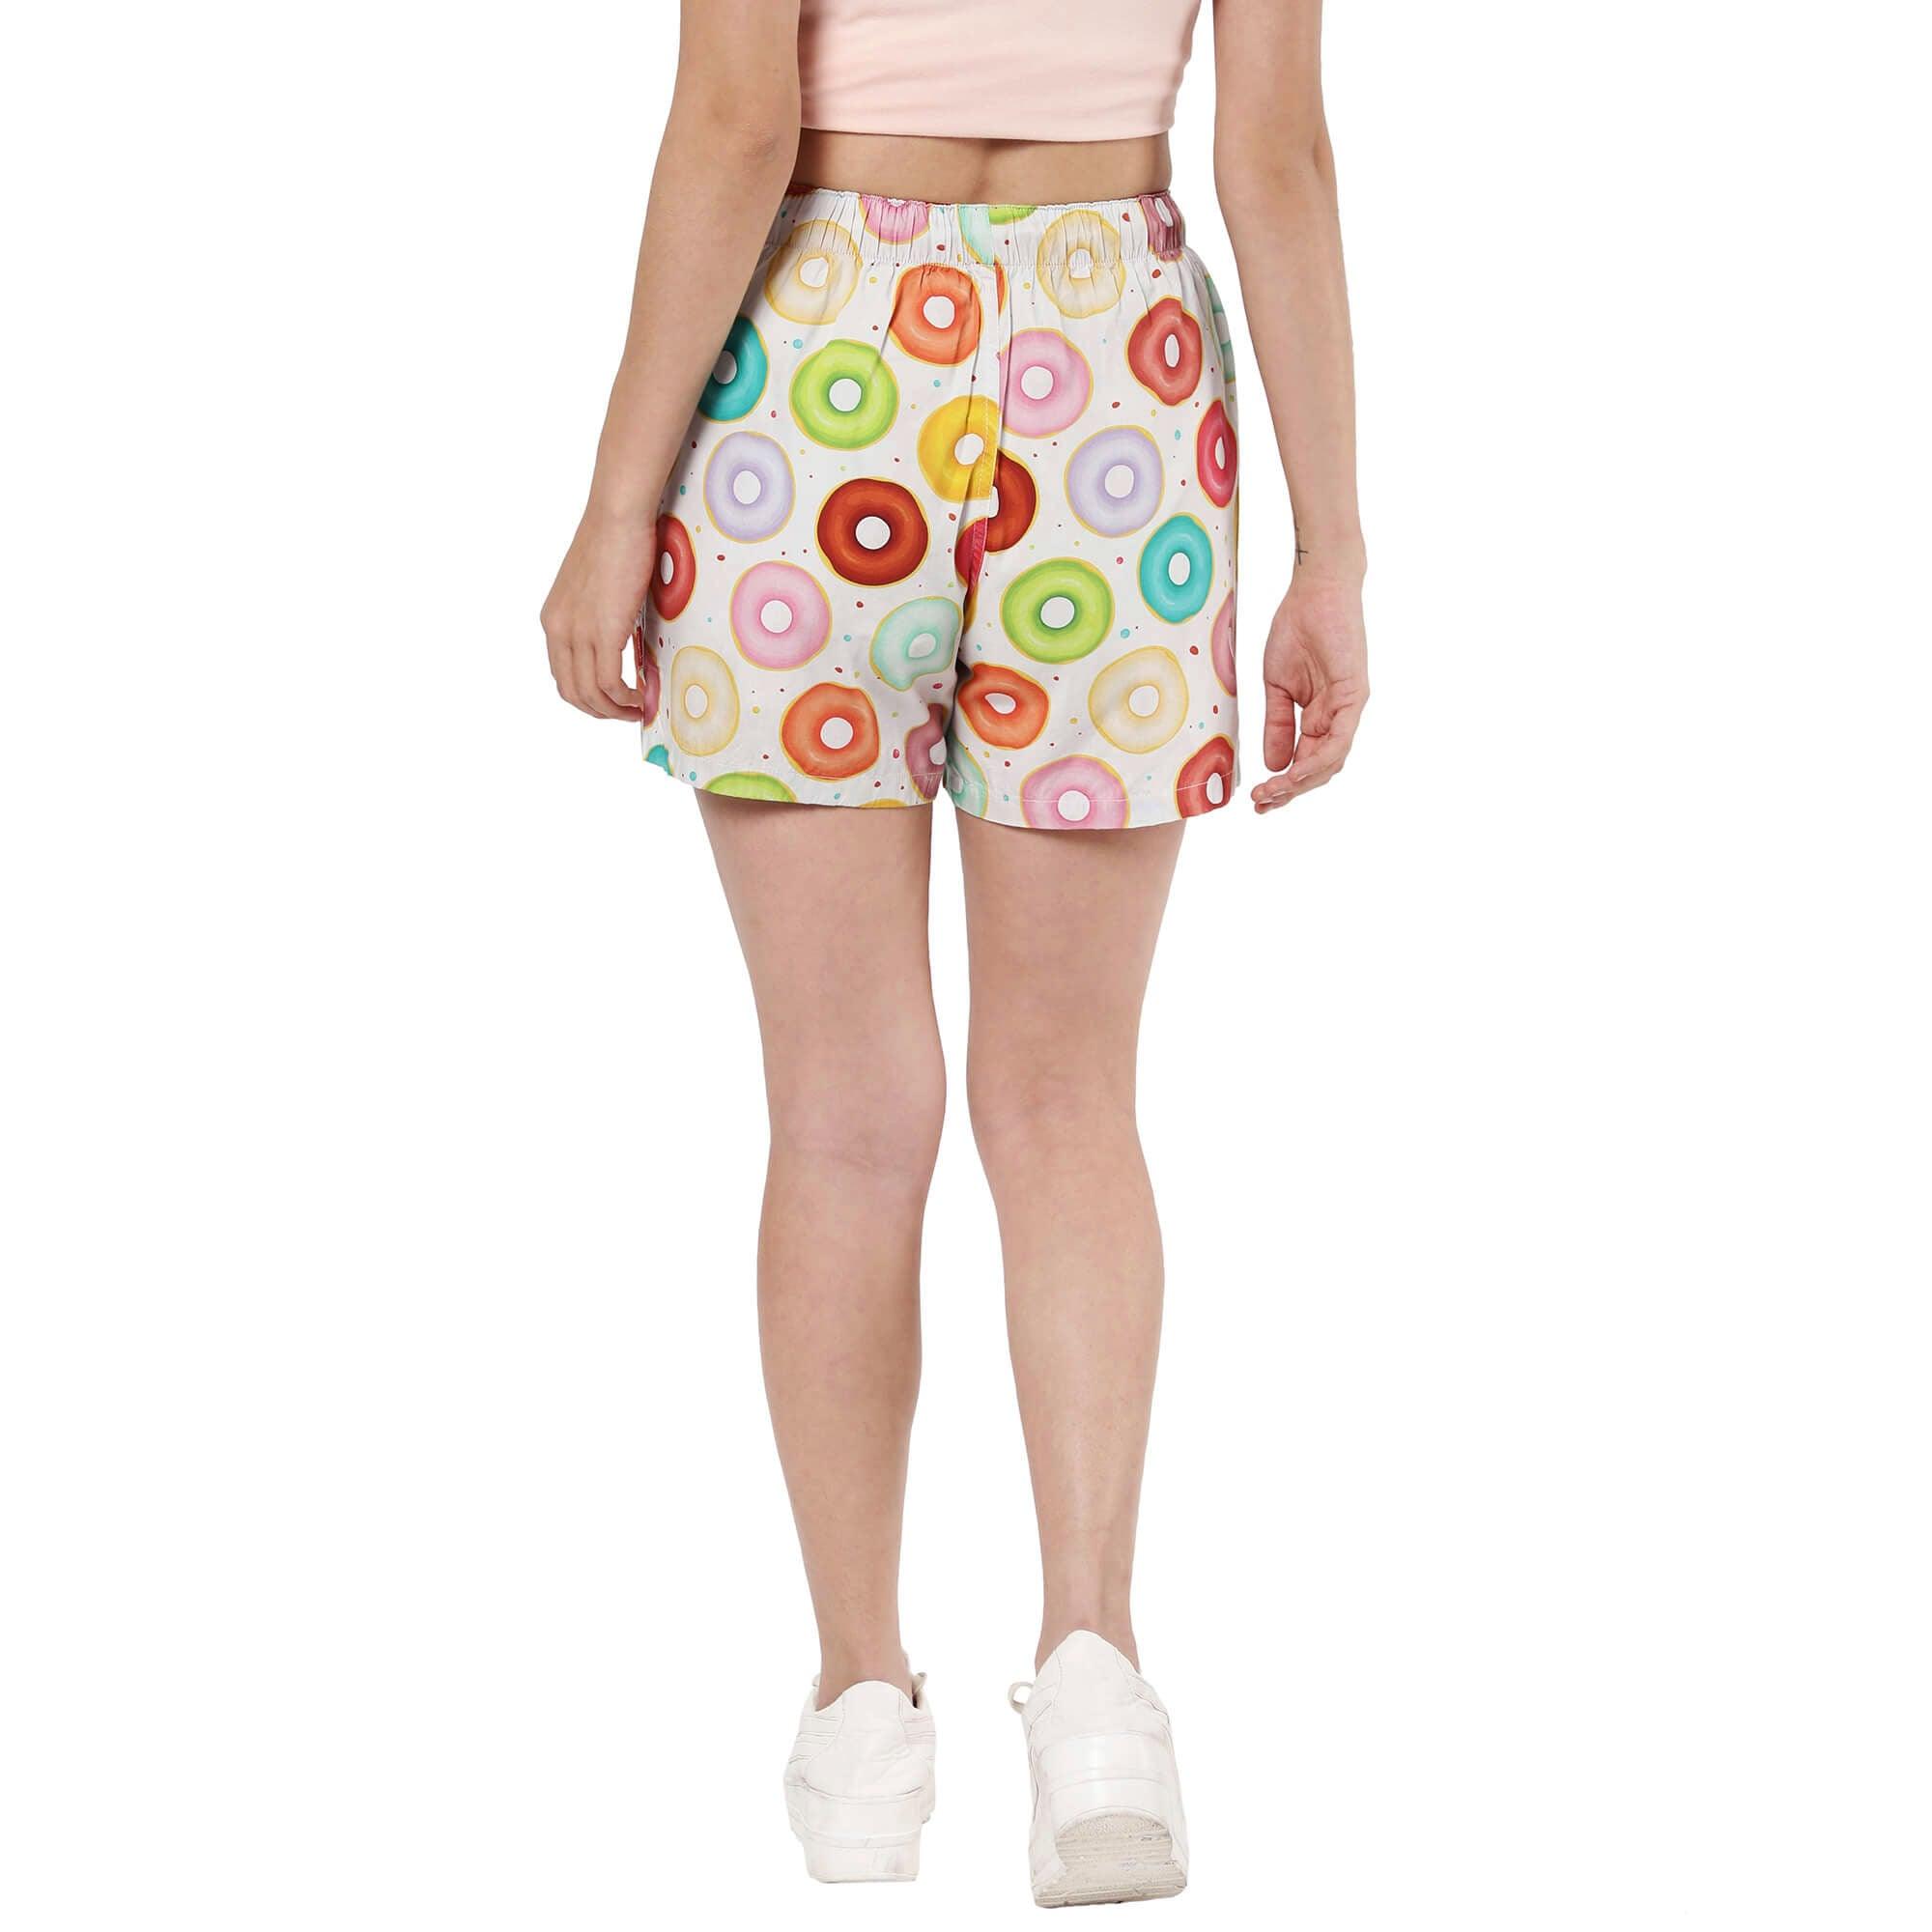 Donuts Boxer Shorts For Women